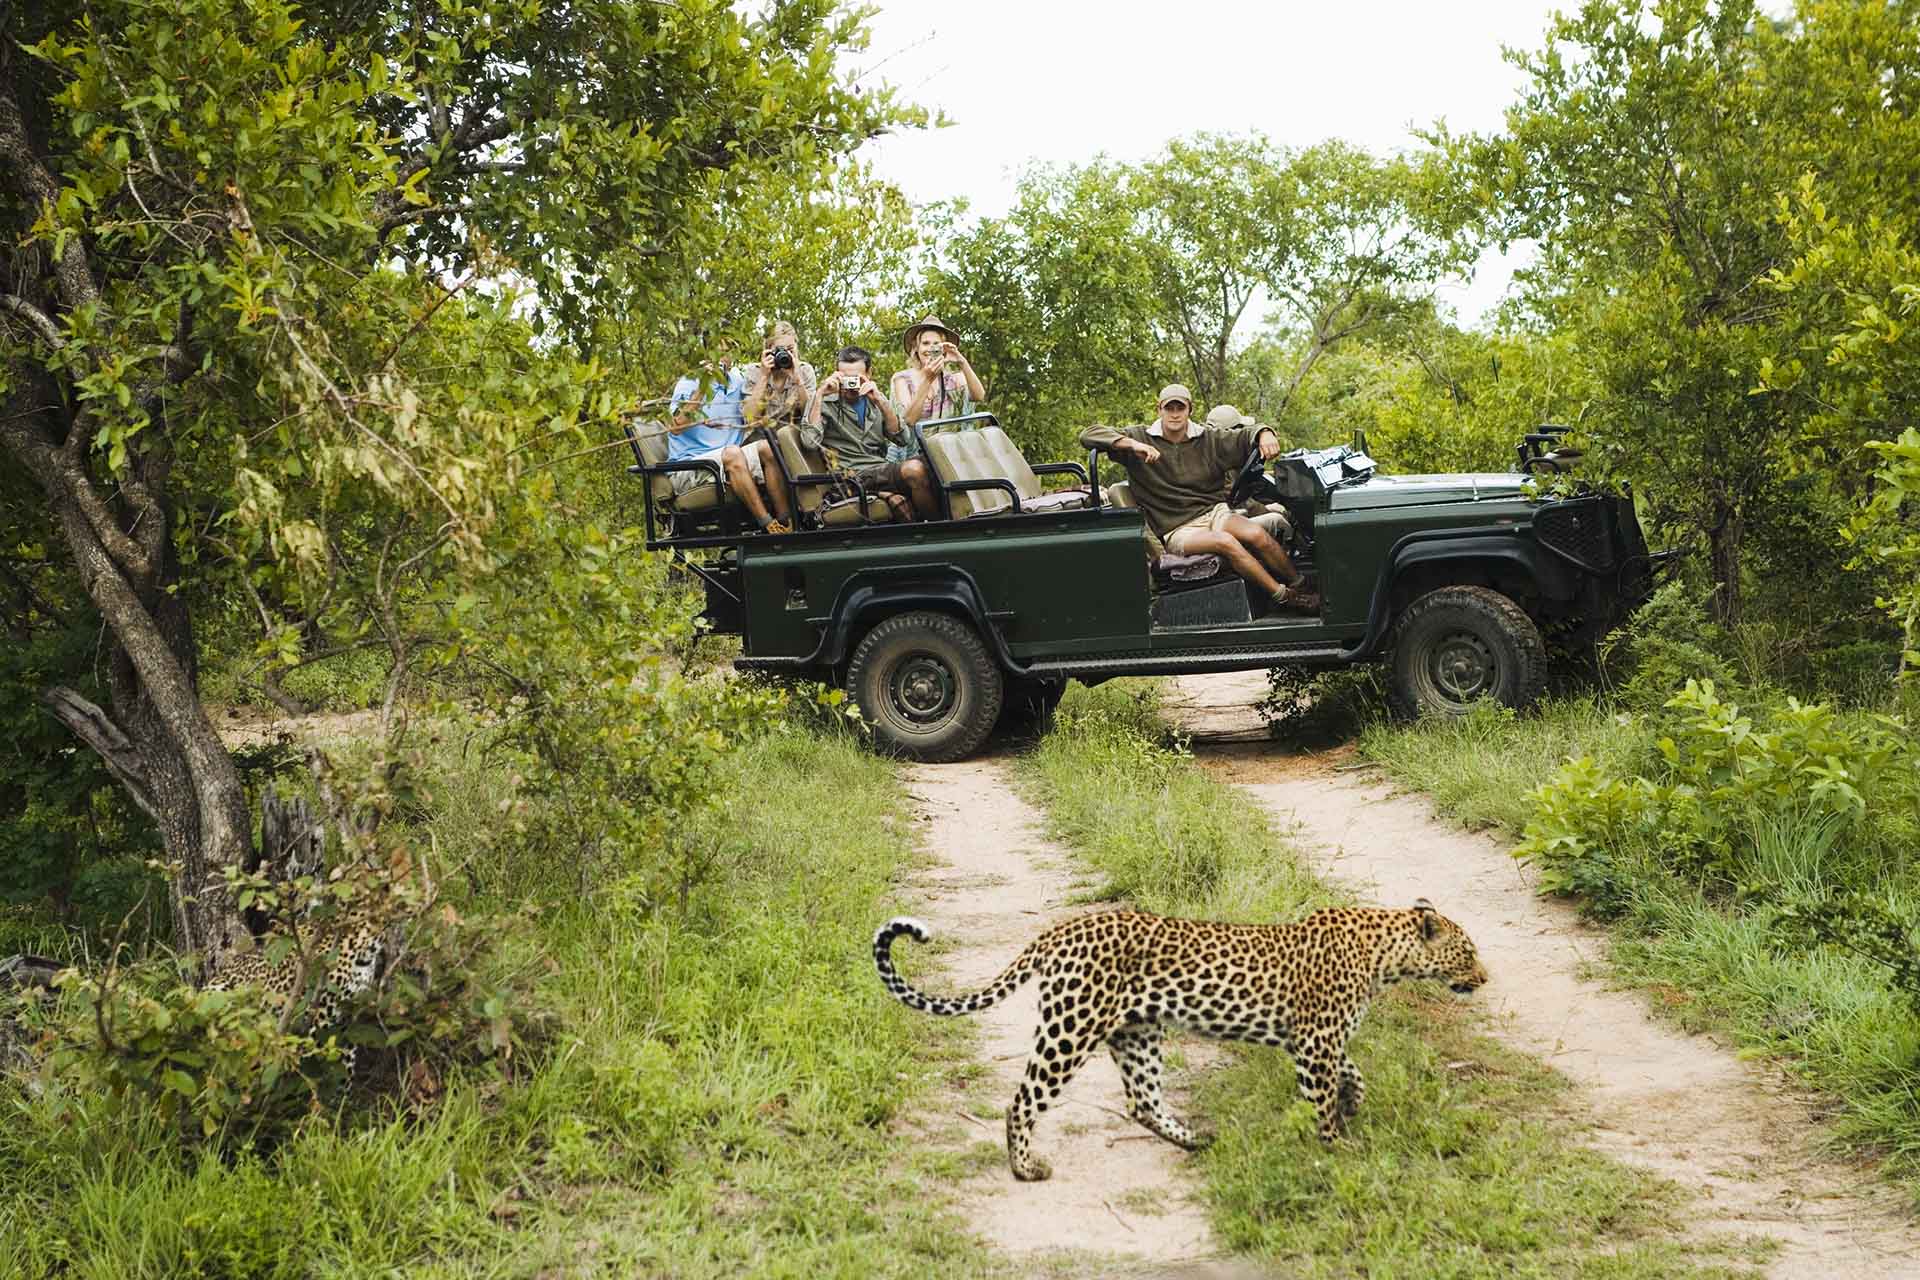 Leopard crossing road with tourists in jeep in background